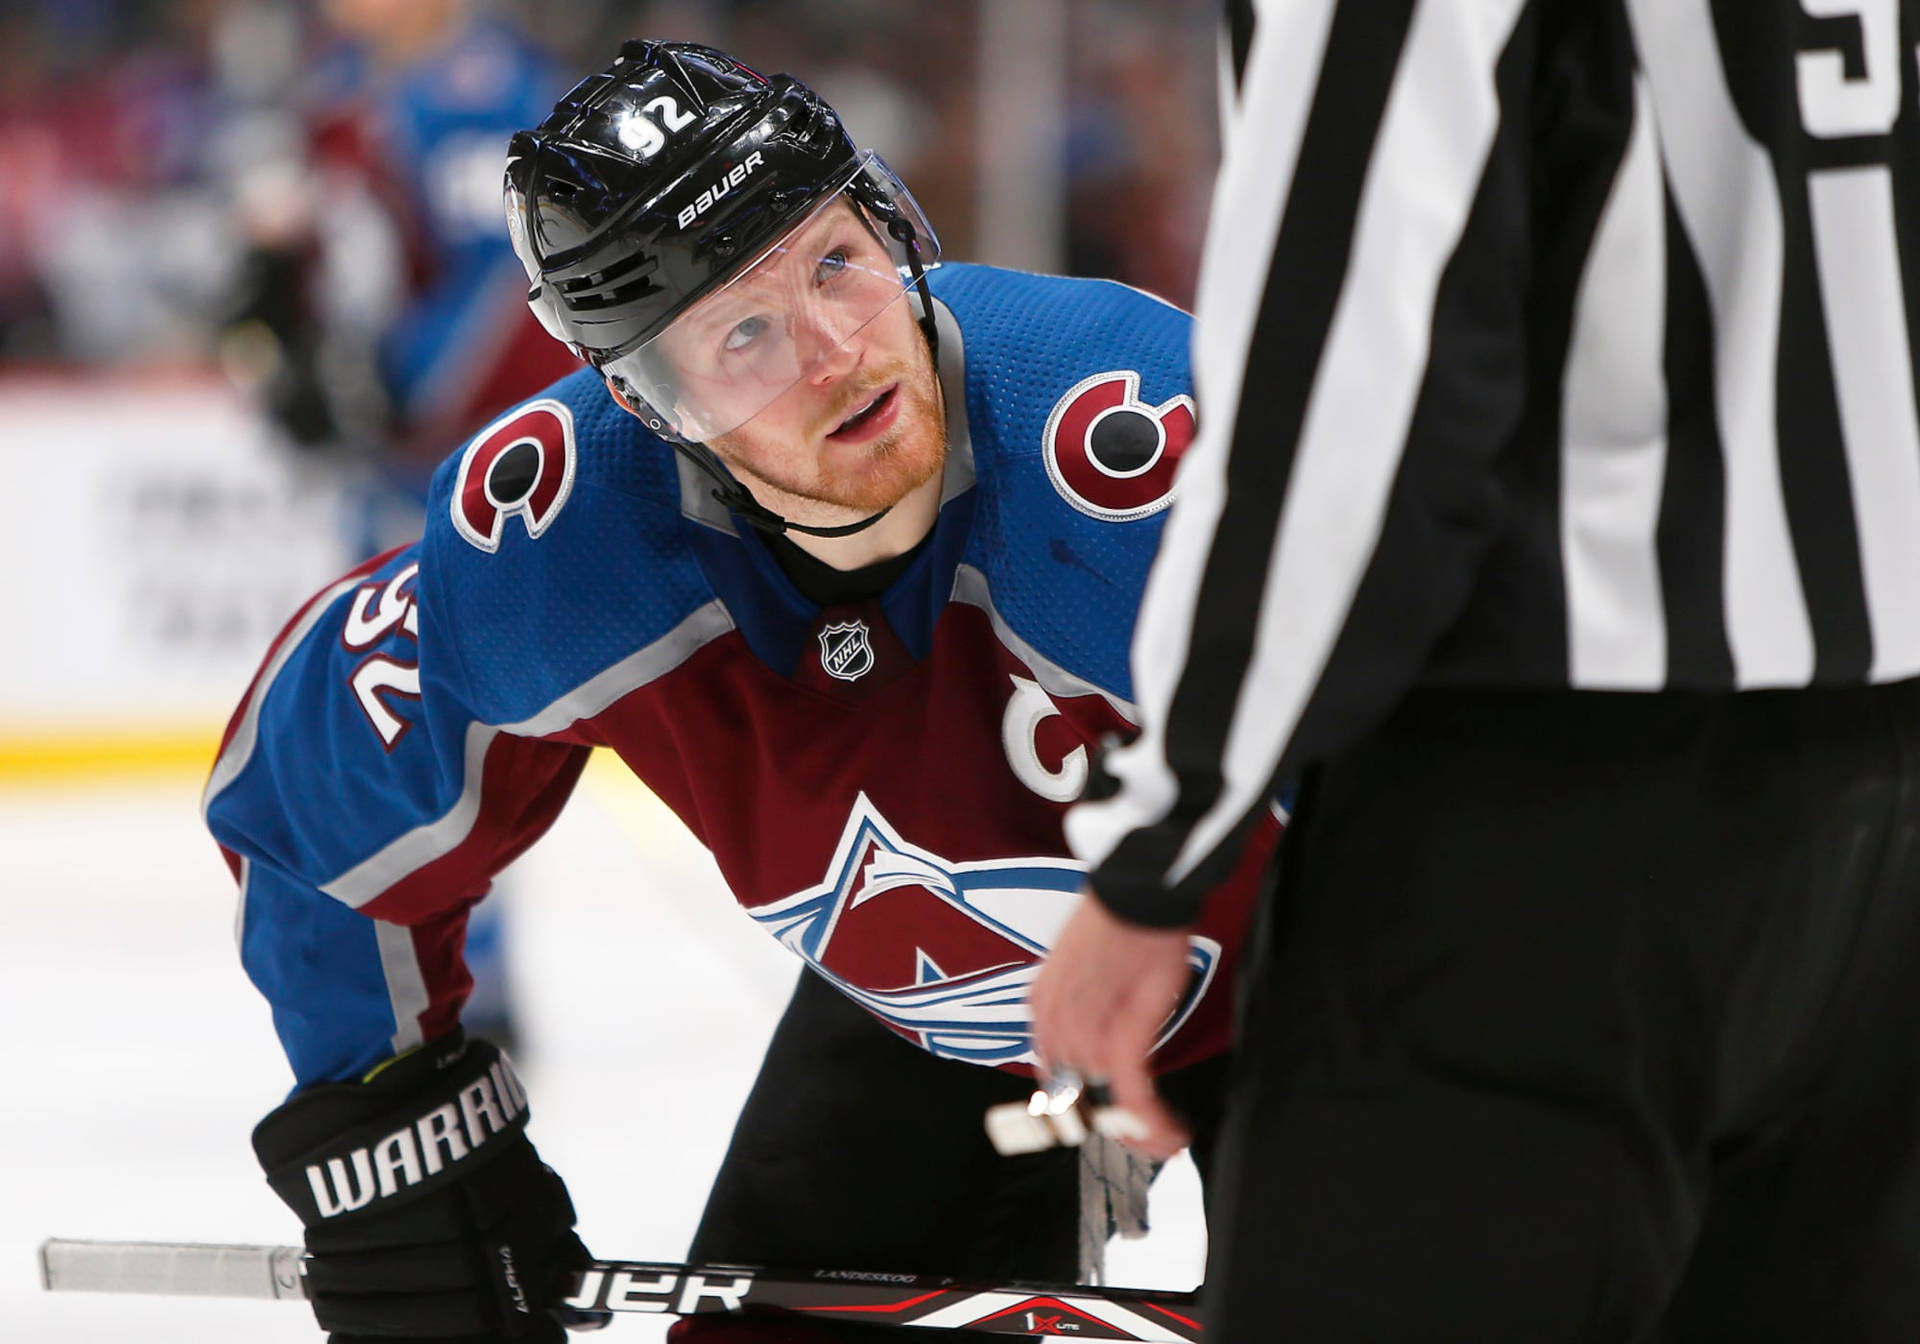 "Driven and Determined: Gabriel Landeskog Leading his Team on Ice" Wallpaper